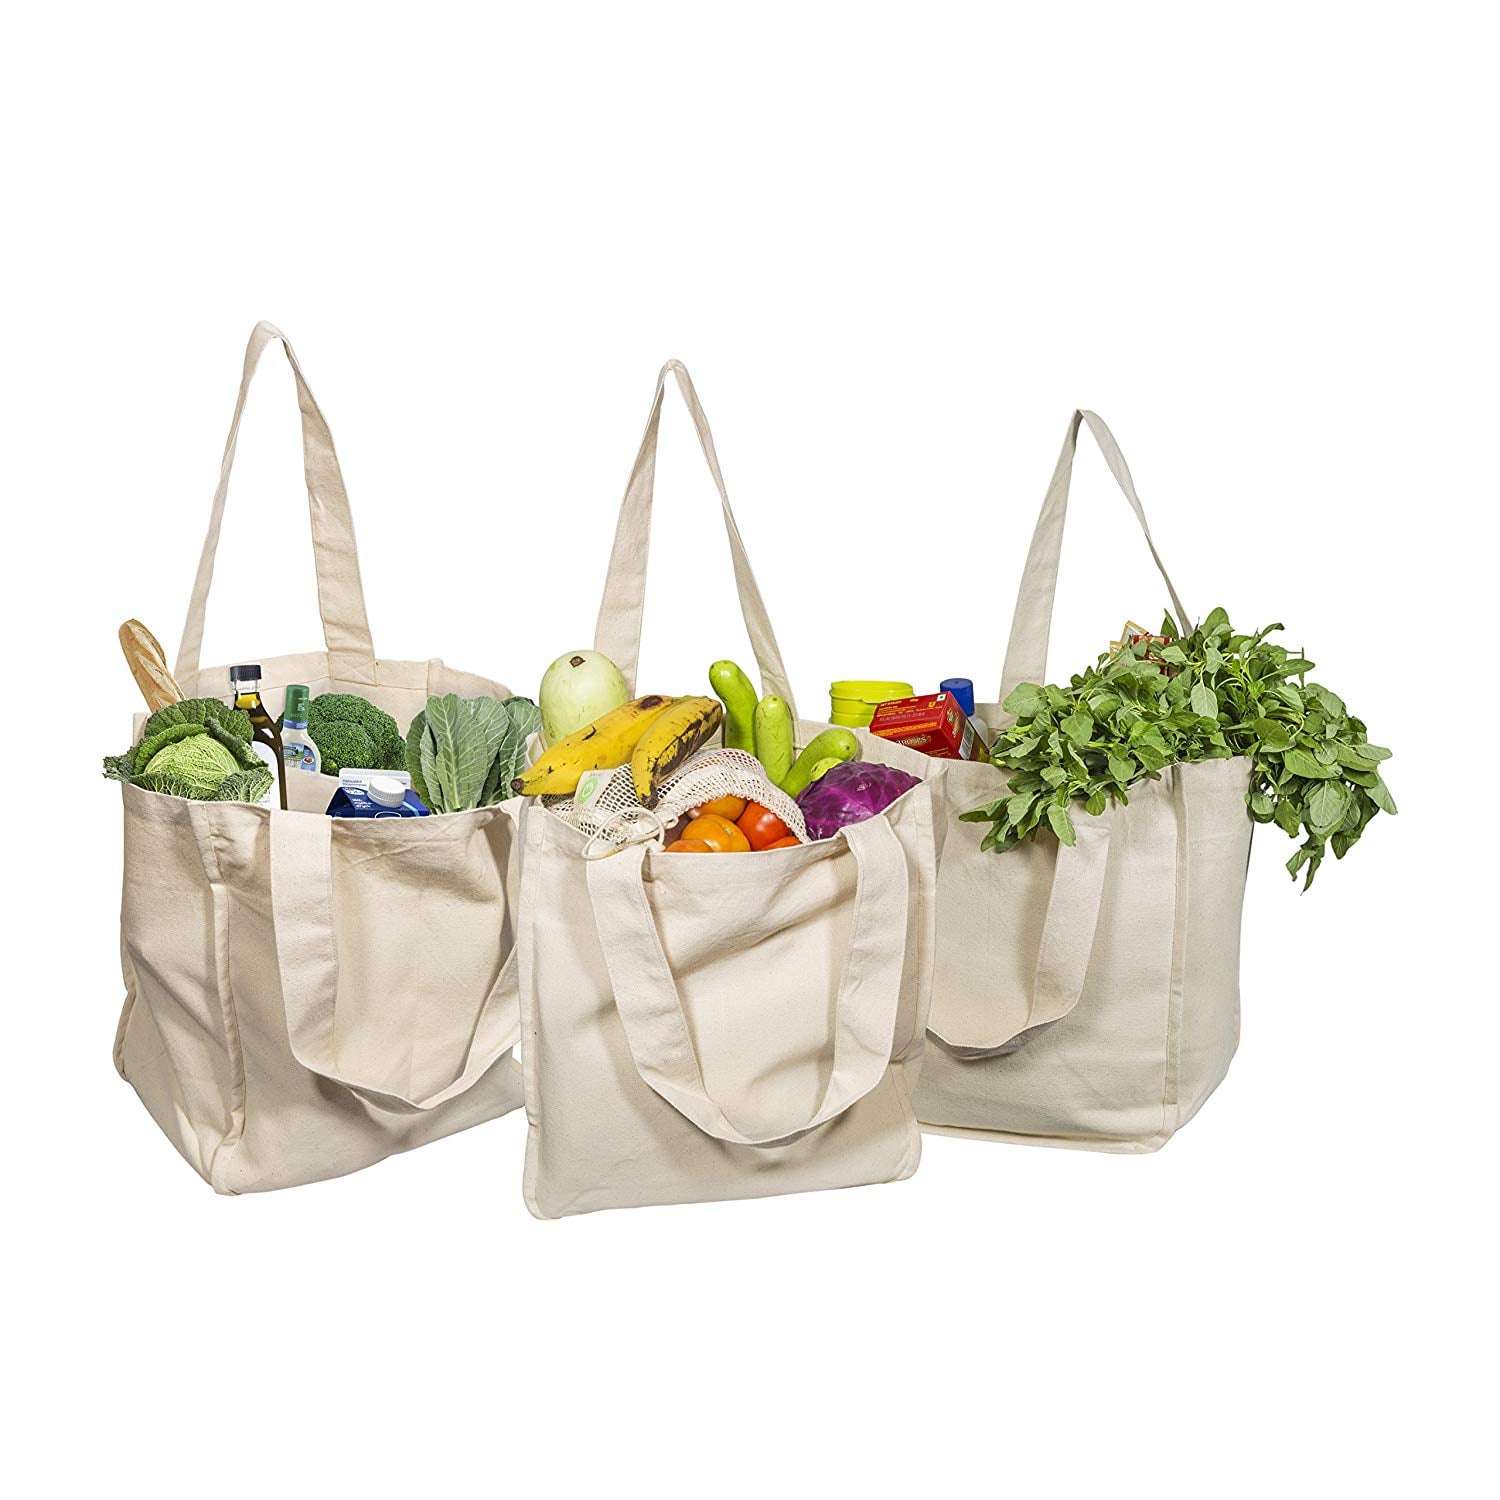 <p><a href="https://www.amazon.com/Best-Canvas-Grocery-Shopping-Bags/dp/B07F6WL121/">BUY NOW</a></p><p>$28</p><p><a href="https://www.amazon.com/Best-Canvas-Grocery-Shopping-Bags/dp/B07F6WL121/" class="ga-track"><strong>Organic Cotton Mart Canvas Grocery Shopping Bags</strong></a> ($28)</p> <p>You never know when you'll need to restock on food, and these canvas bags make grocery shopping easy. You can buy three for $28, but if you're just taking a quick trip, then these bags are also individually sold.</p>